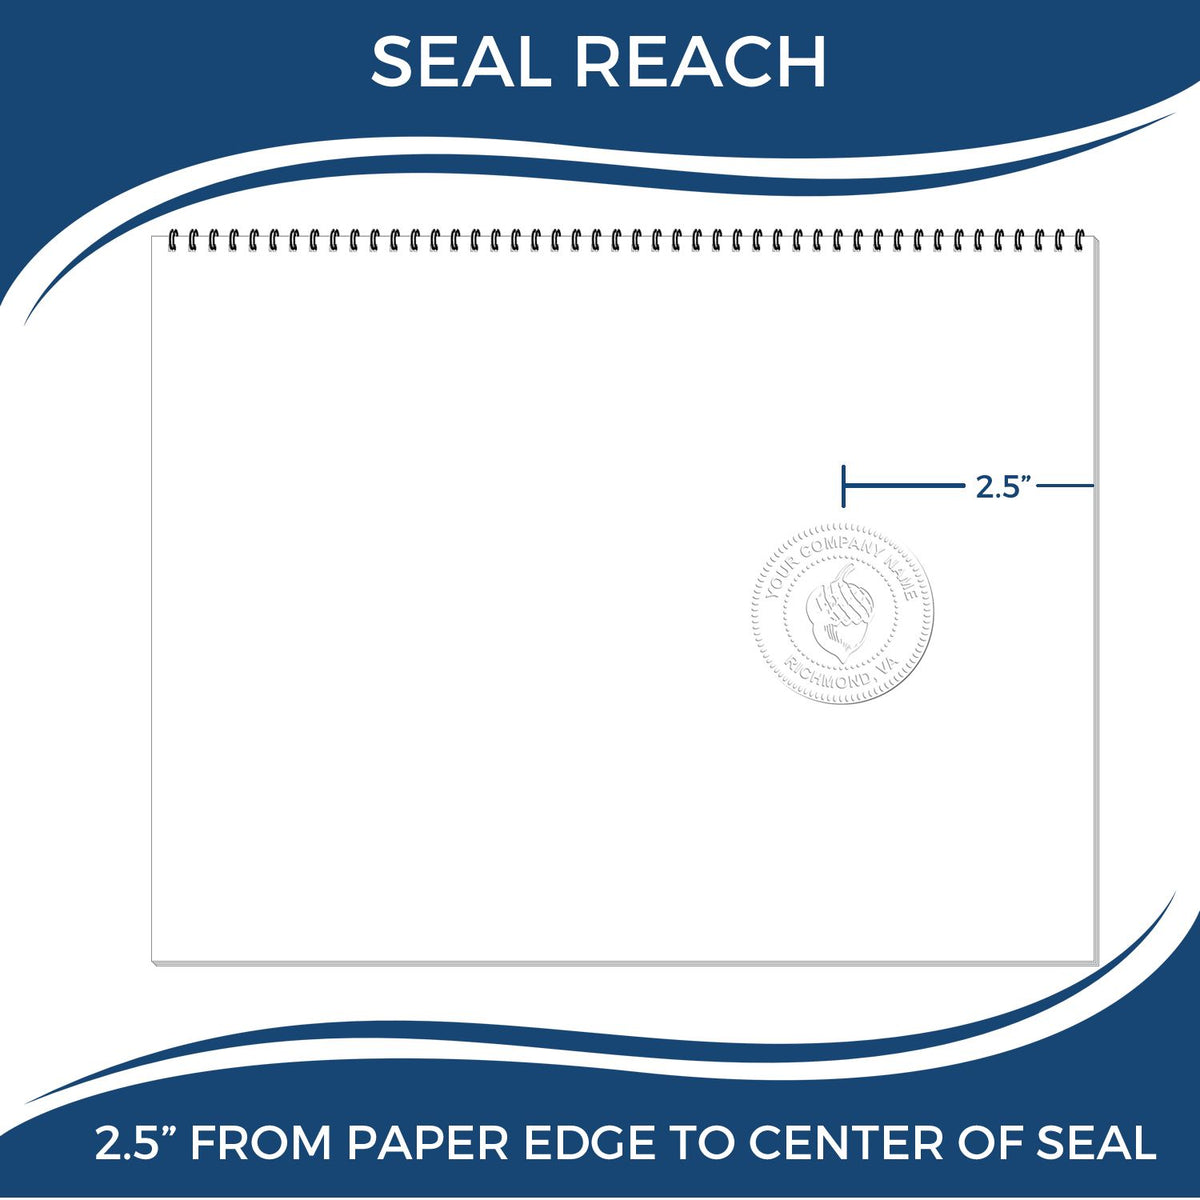 An infographic showing the seal reach which is represented by a ruler and a miniature seal image of the District of Columbia Long Reach Architectural Embossing Seal